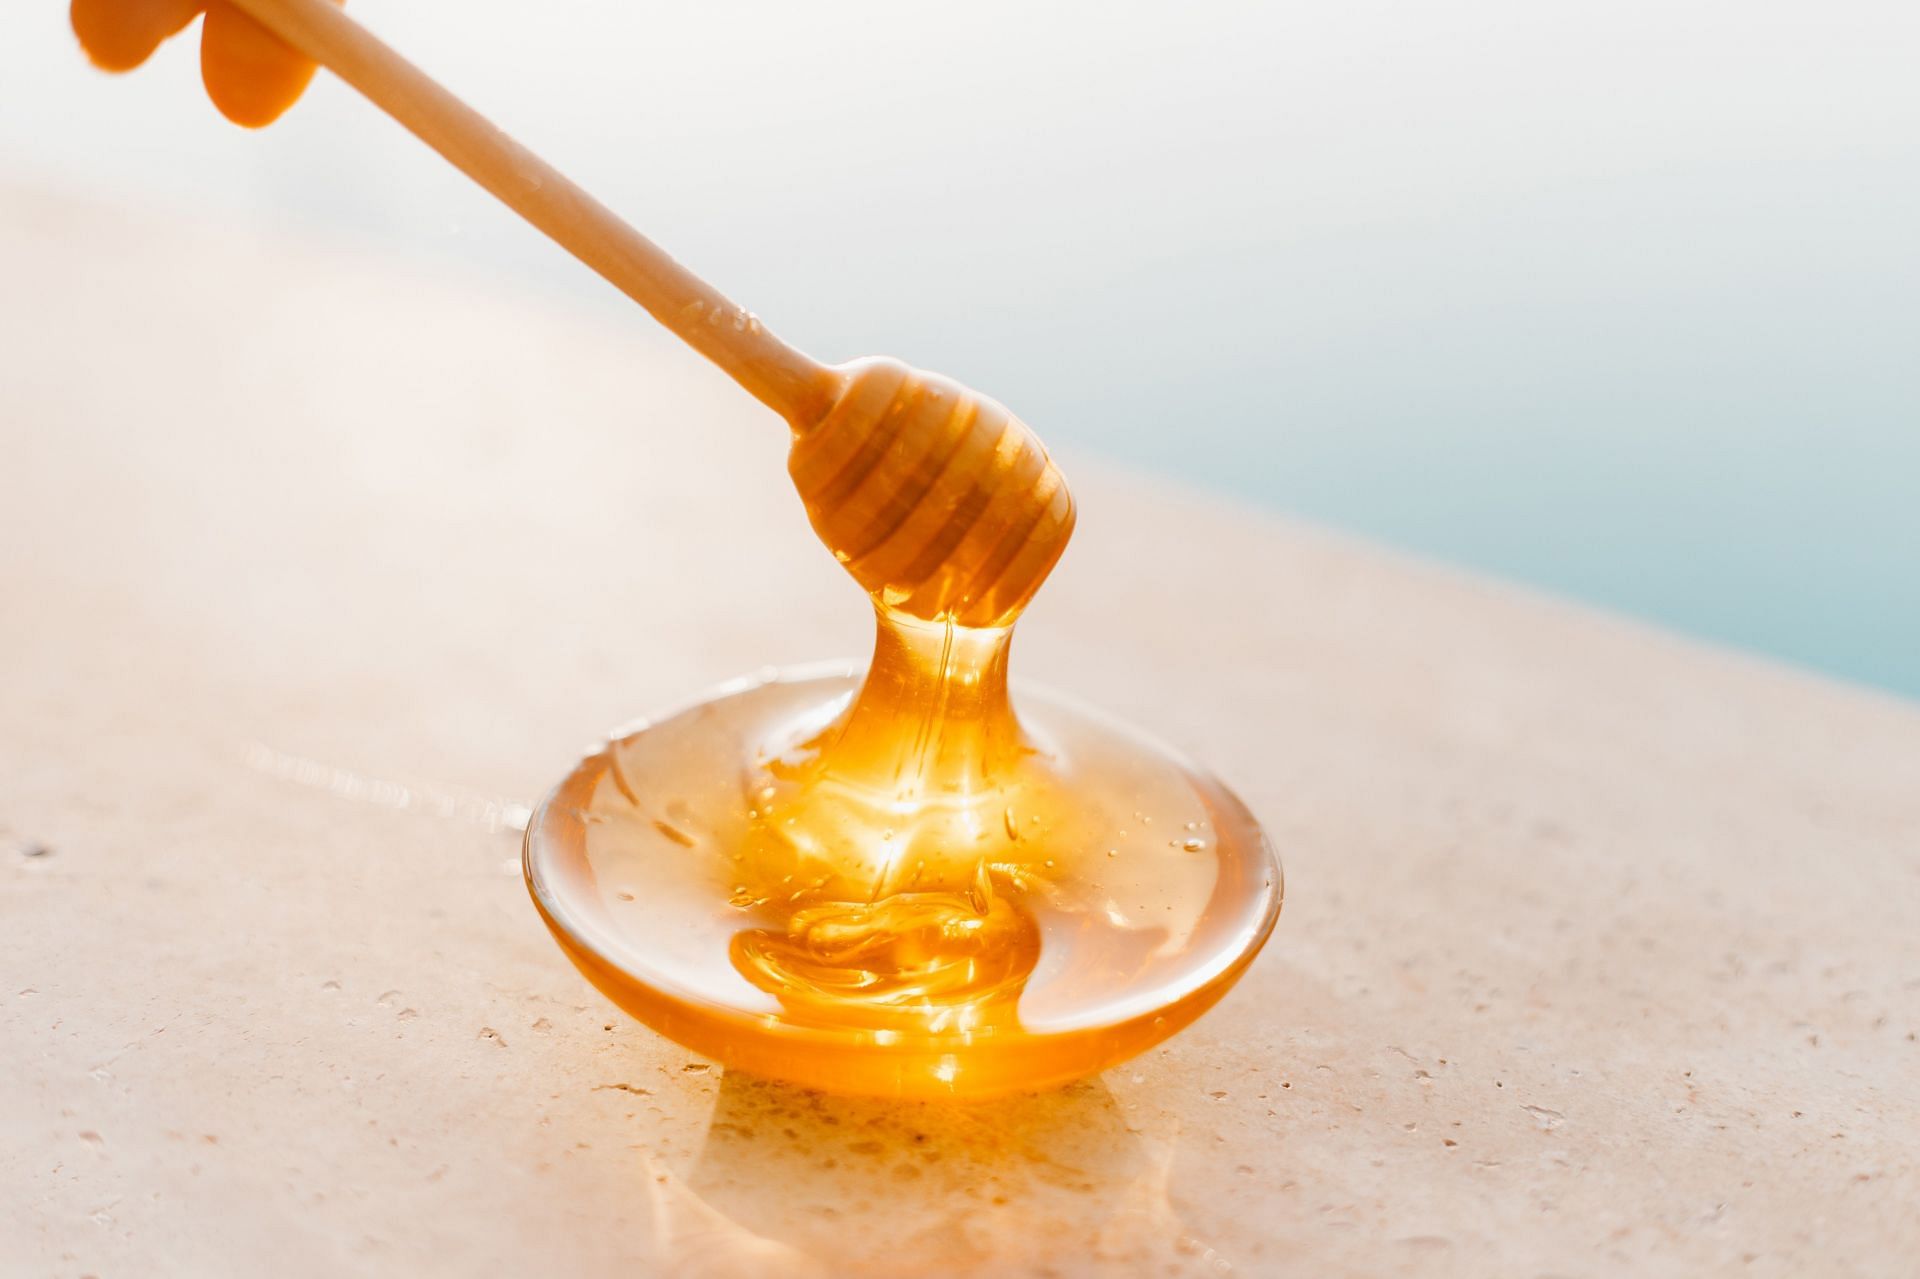 There are several honey benefits for skin, such as moisturising and exfoliating. (Image via pexels/Roman Odintsov)